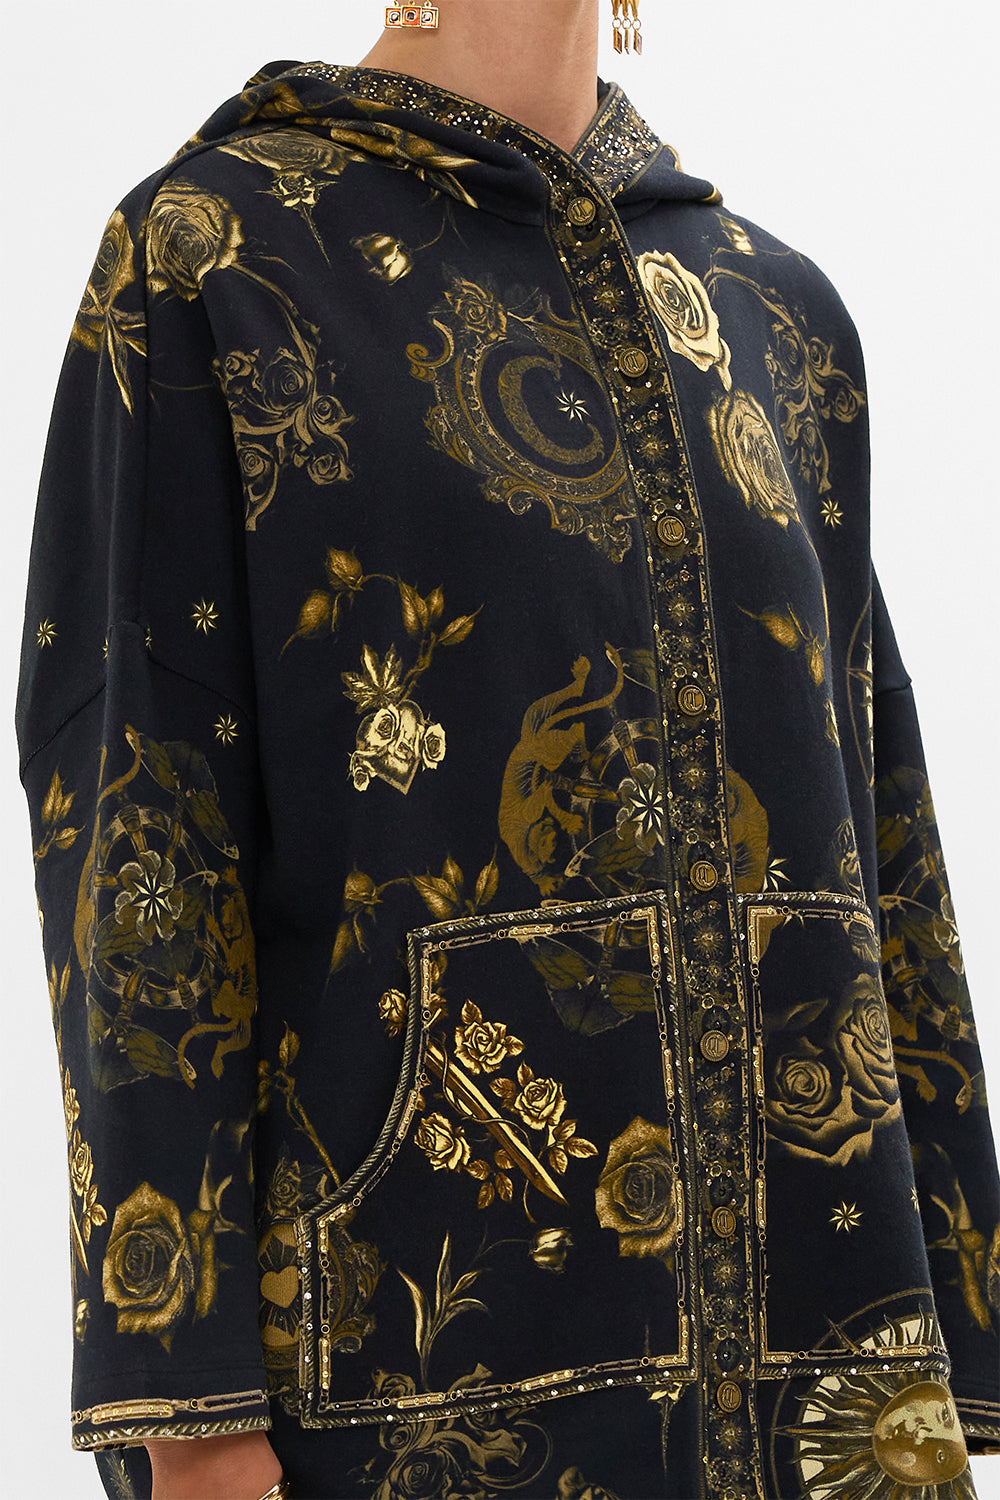 CAMILLA black hoodie jacket with pockets in So Says The Oracle print.